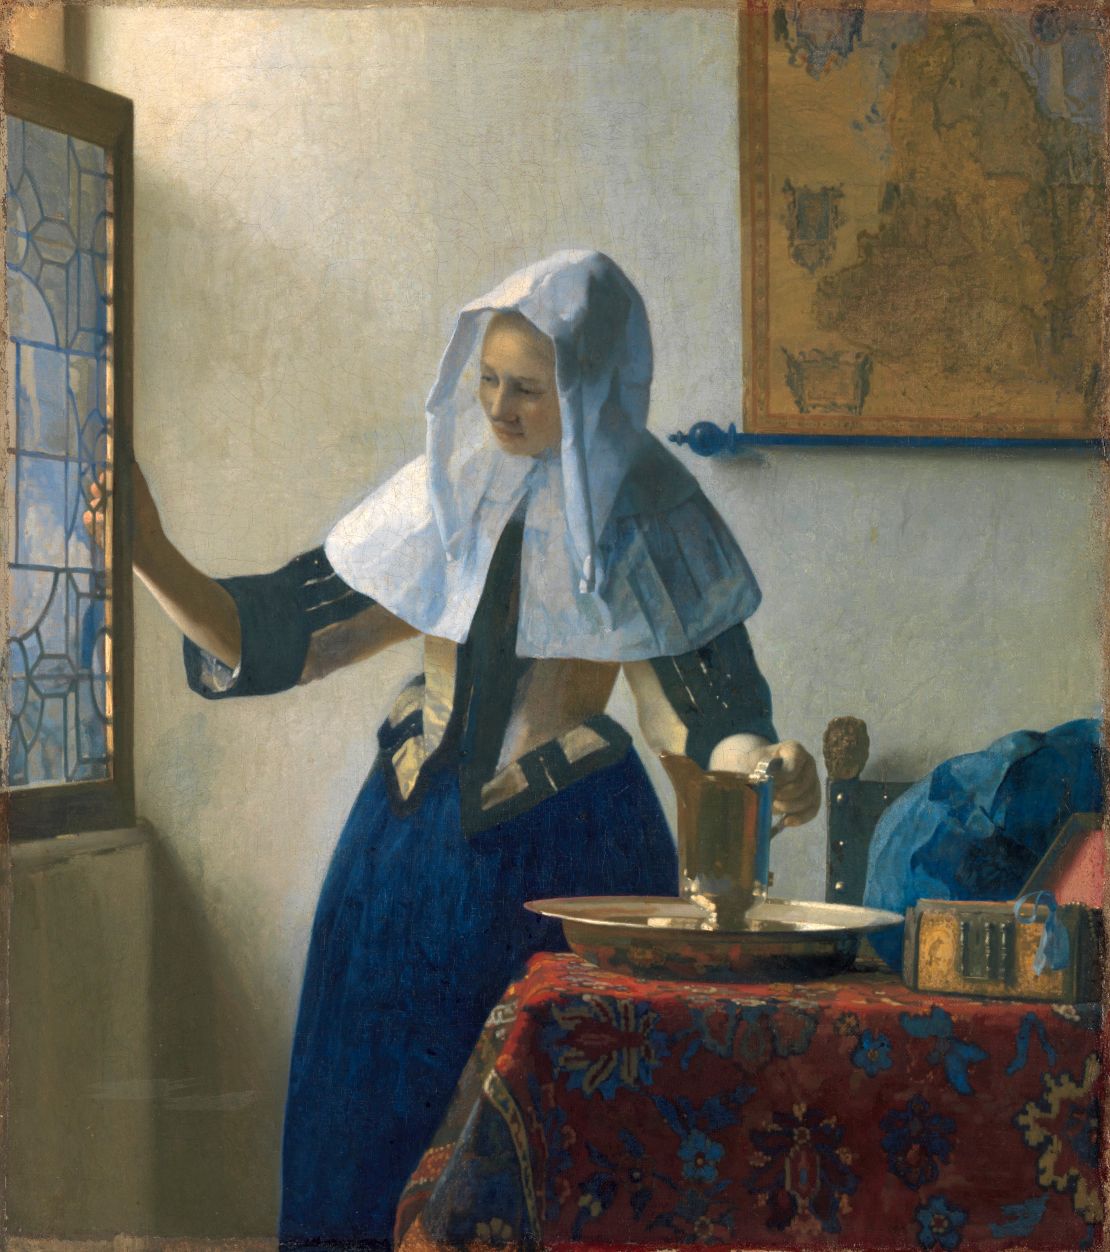 Vermeer's "Young Woman with a Water Pitcher" (1662-1665) 